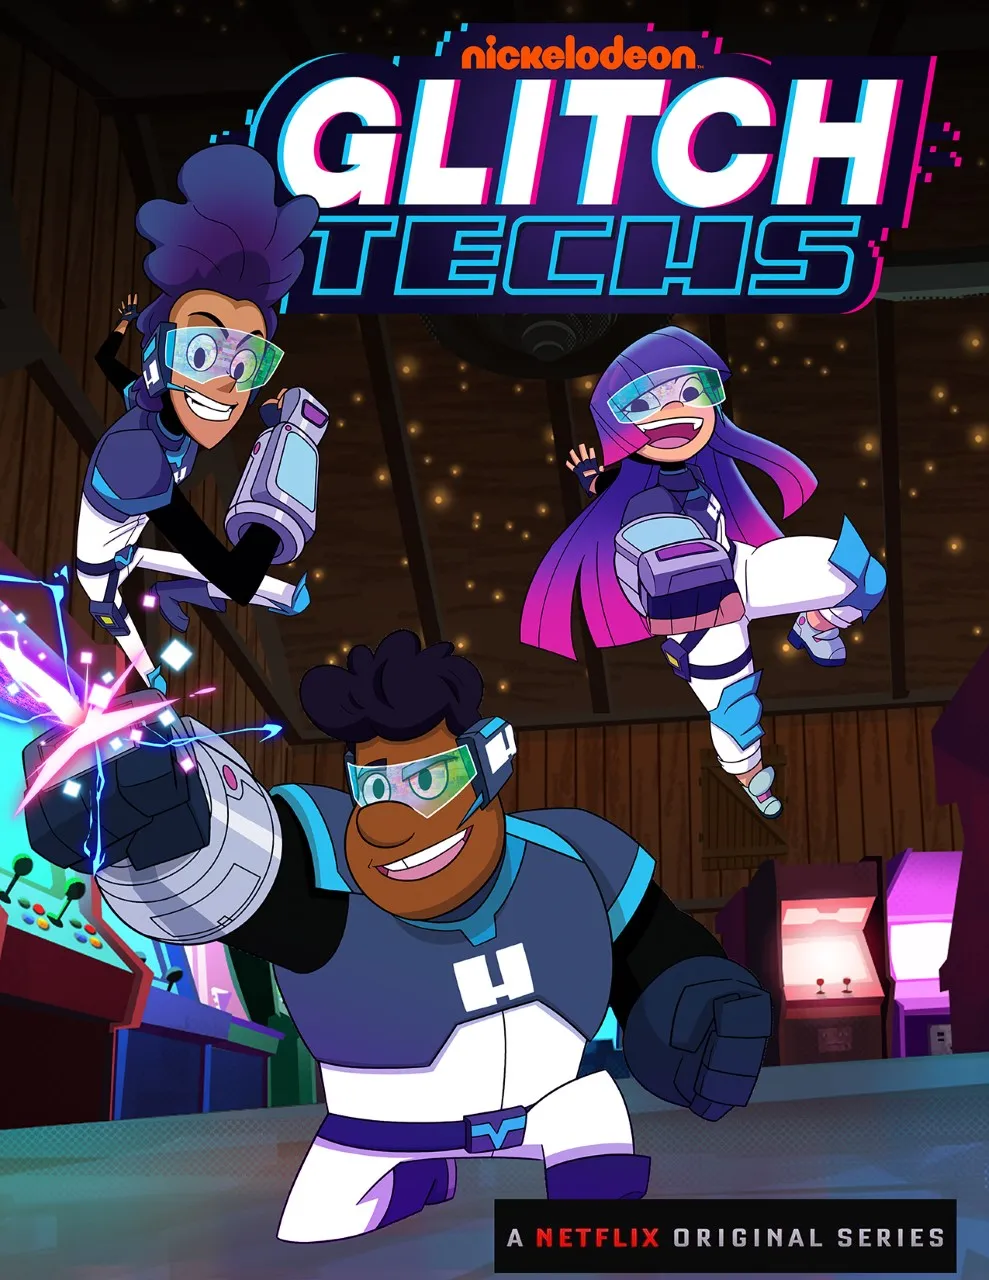 featured image - If Glitch Techs is Any Indication, the Nickelodeon and Netflix Partnership is a Winning Deal